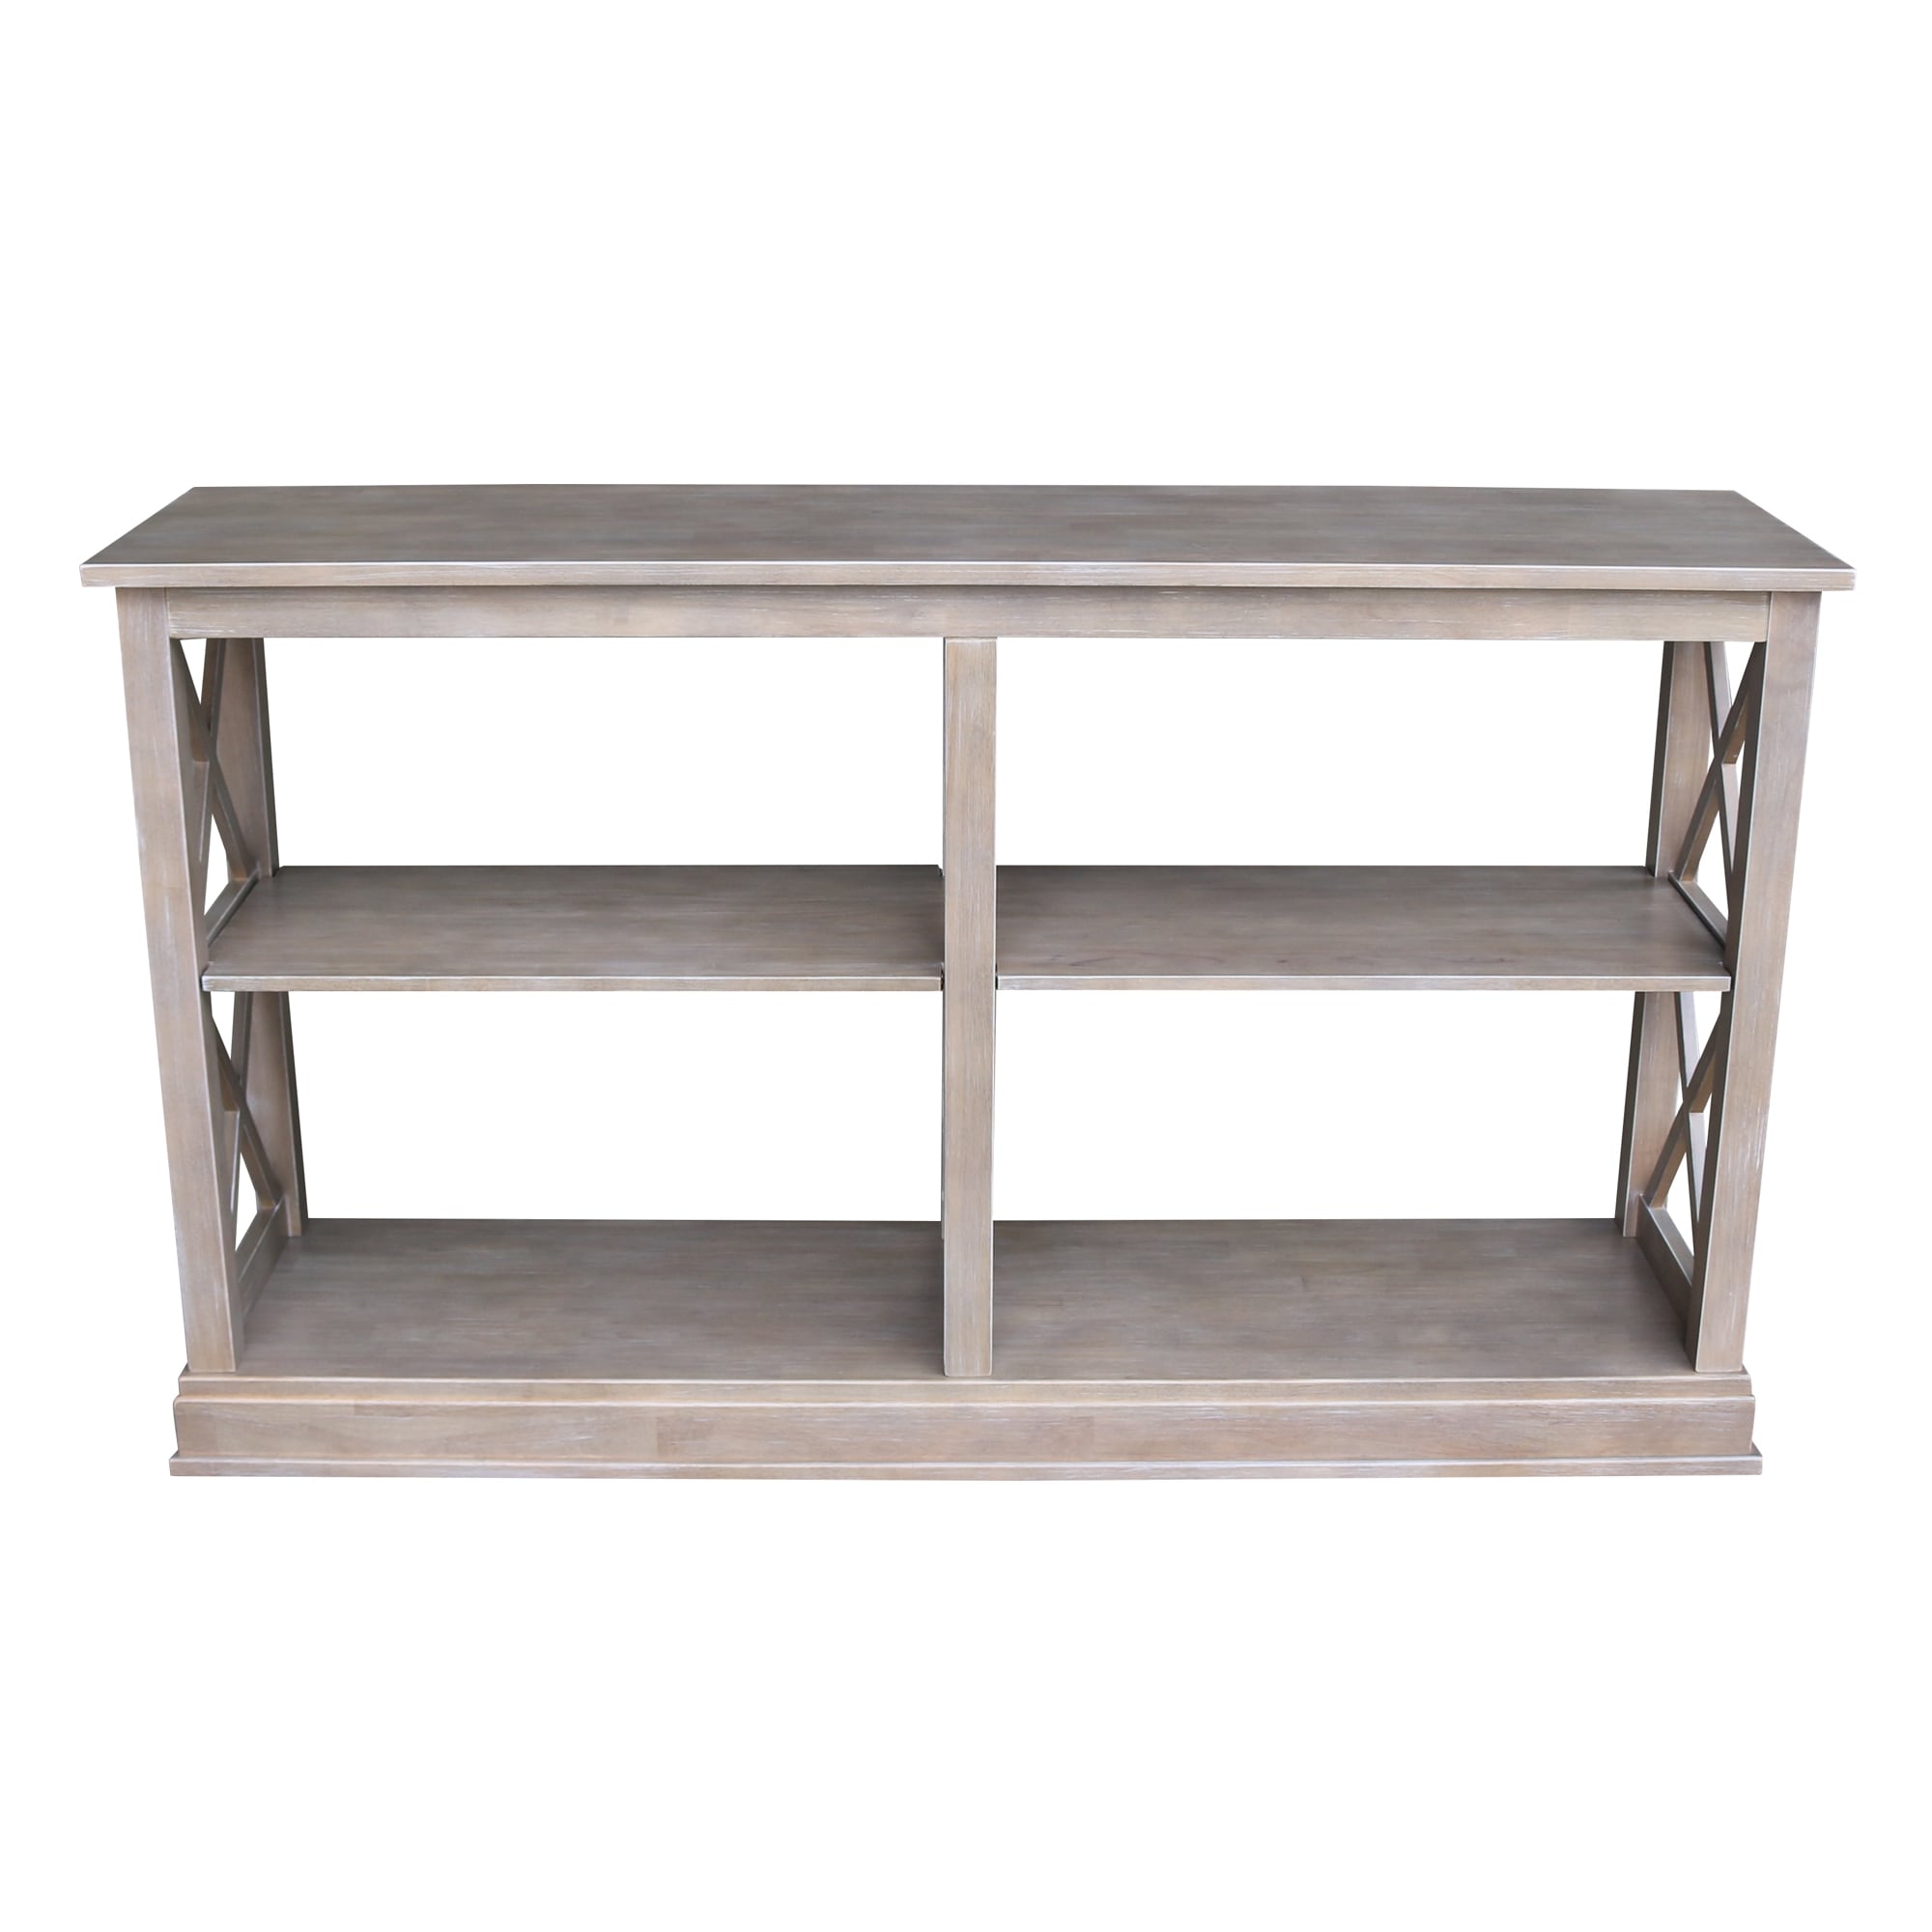 International Concepts Transitional Gray Finish Wood Sofa Table 60-in ...